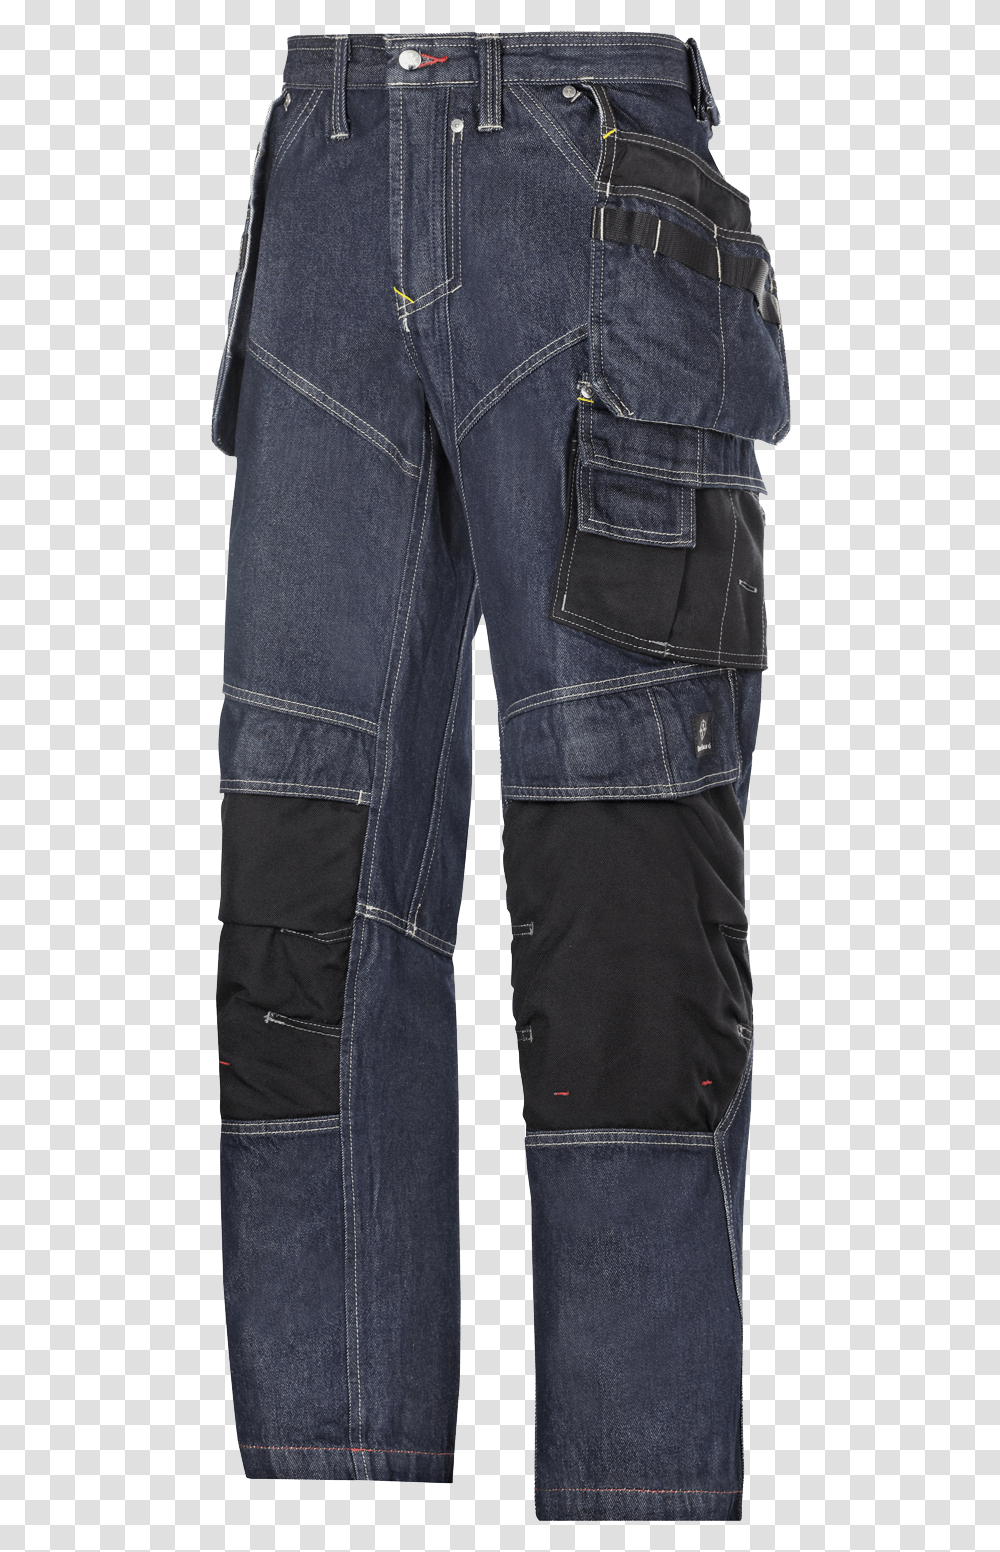 Work Jeans Image Snickers Denim Work Trousers, Apparel, Pants, Shorts Transparent Png